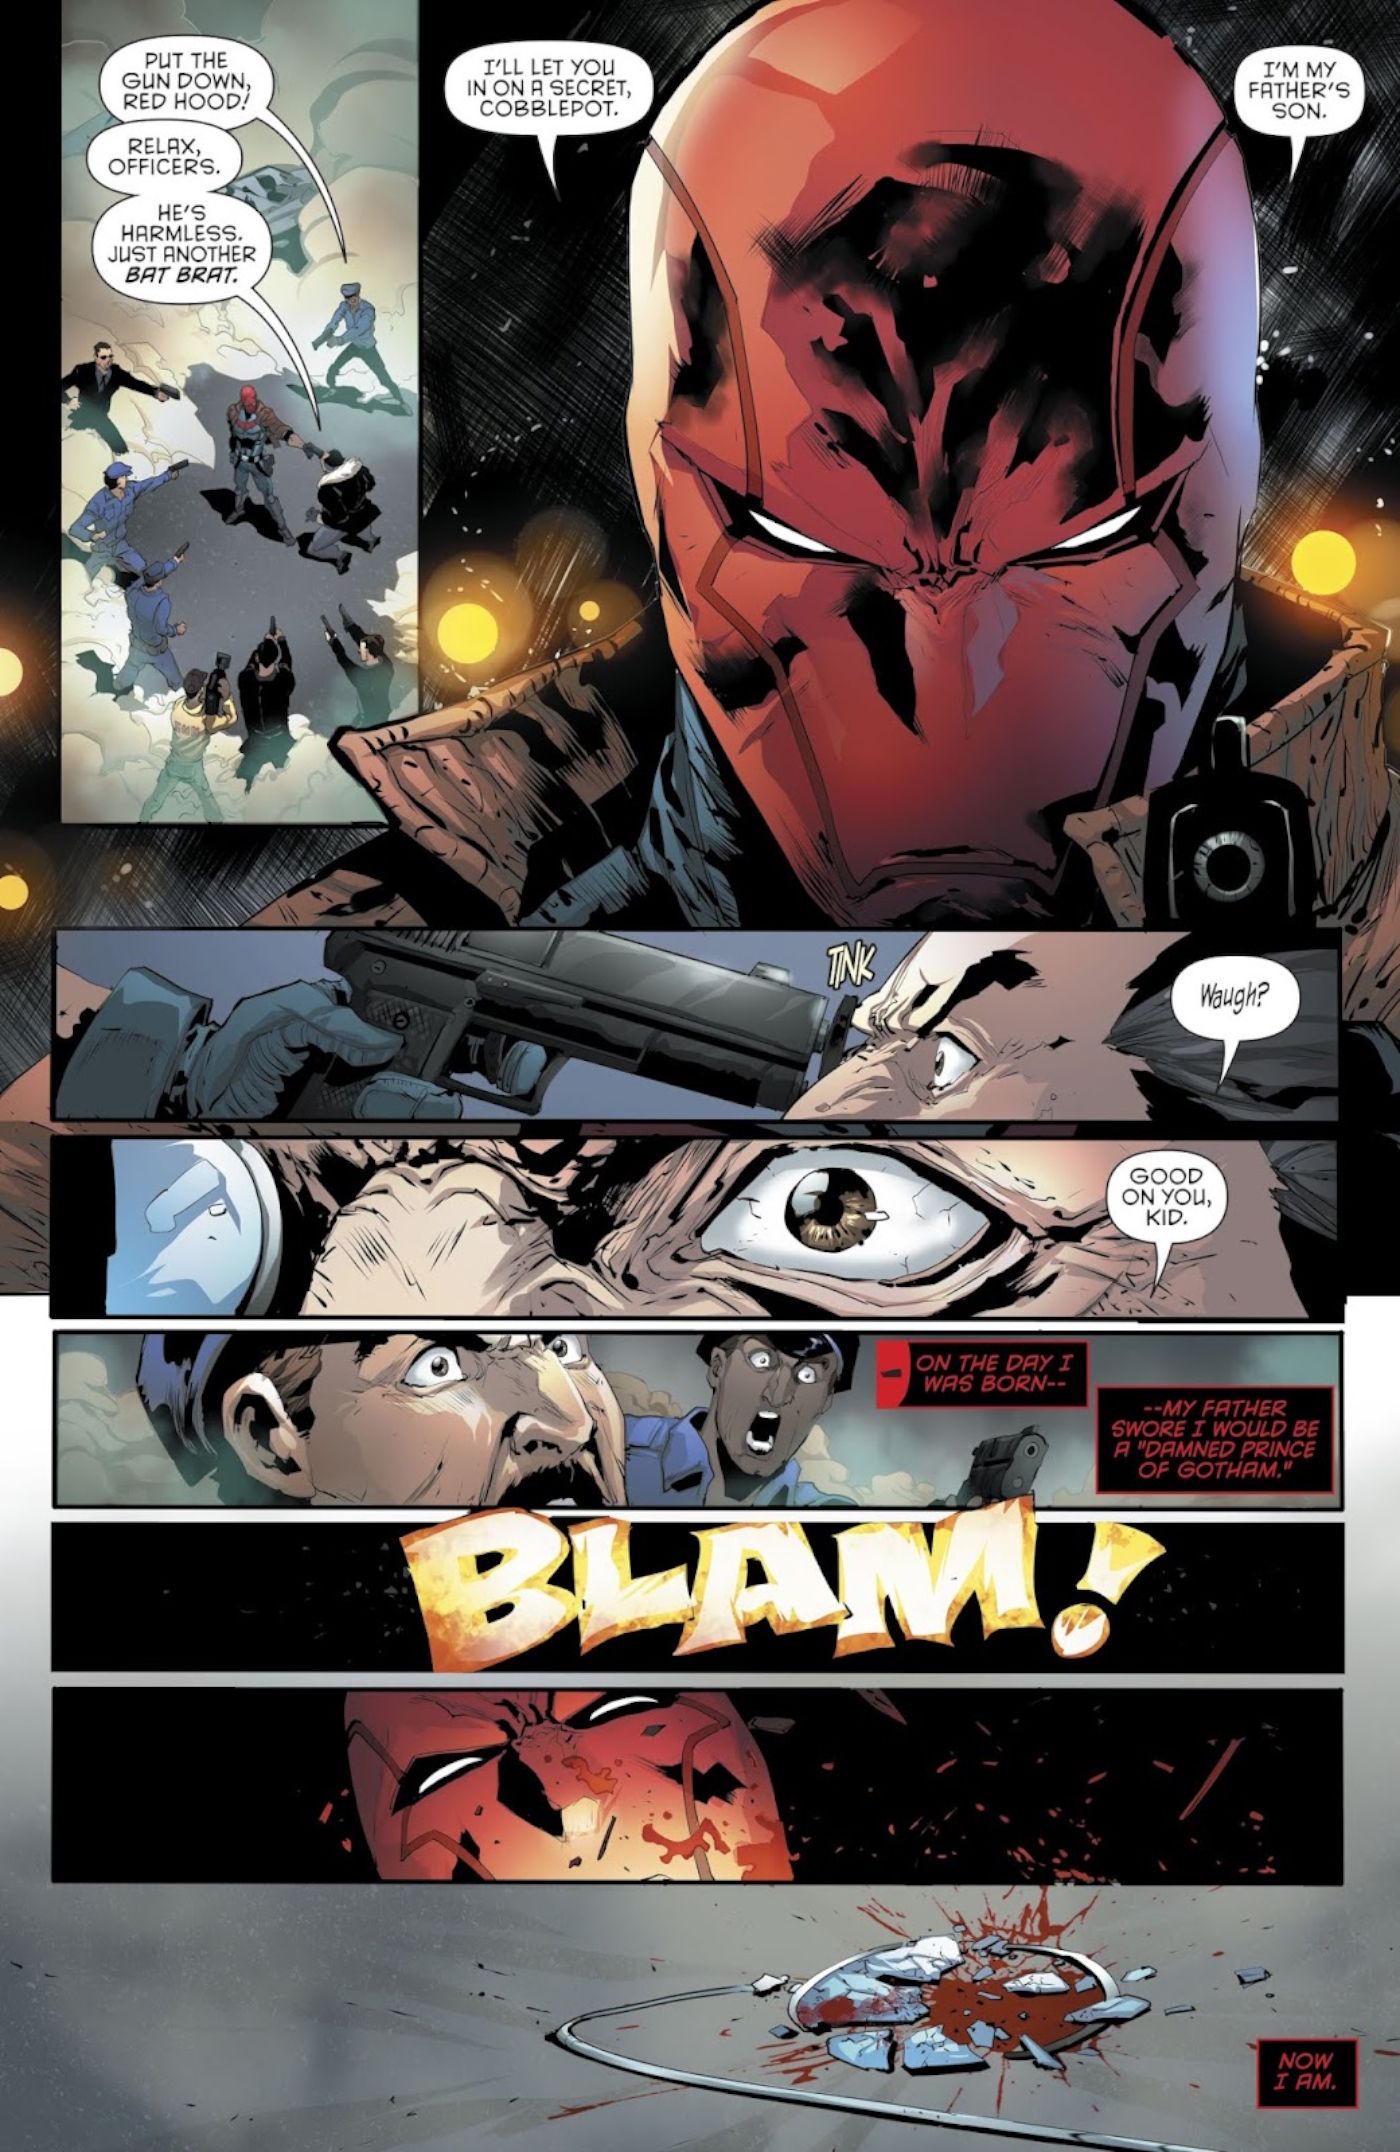 Red Hood Shoots The Joker Point Blank In The Face